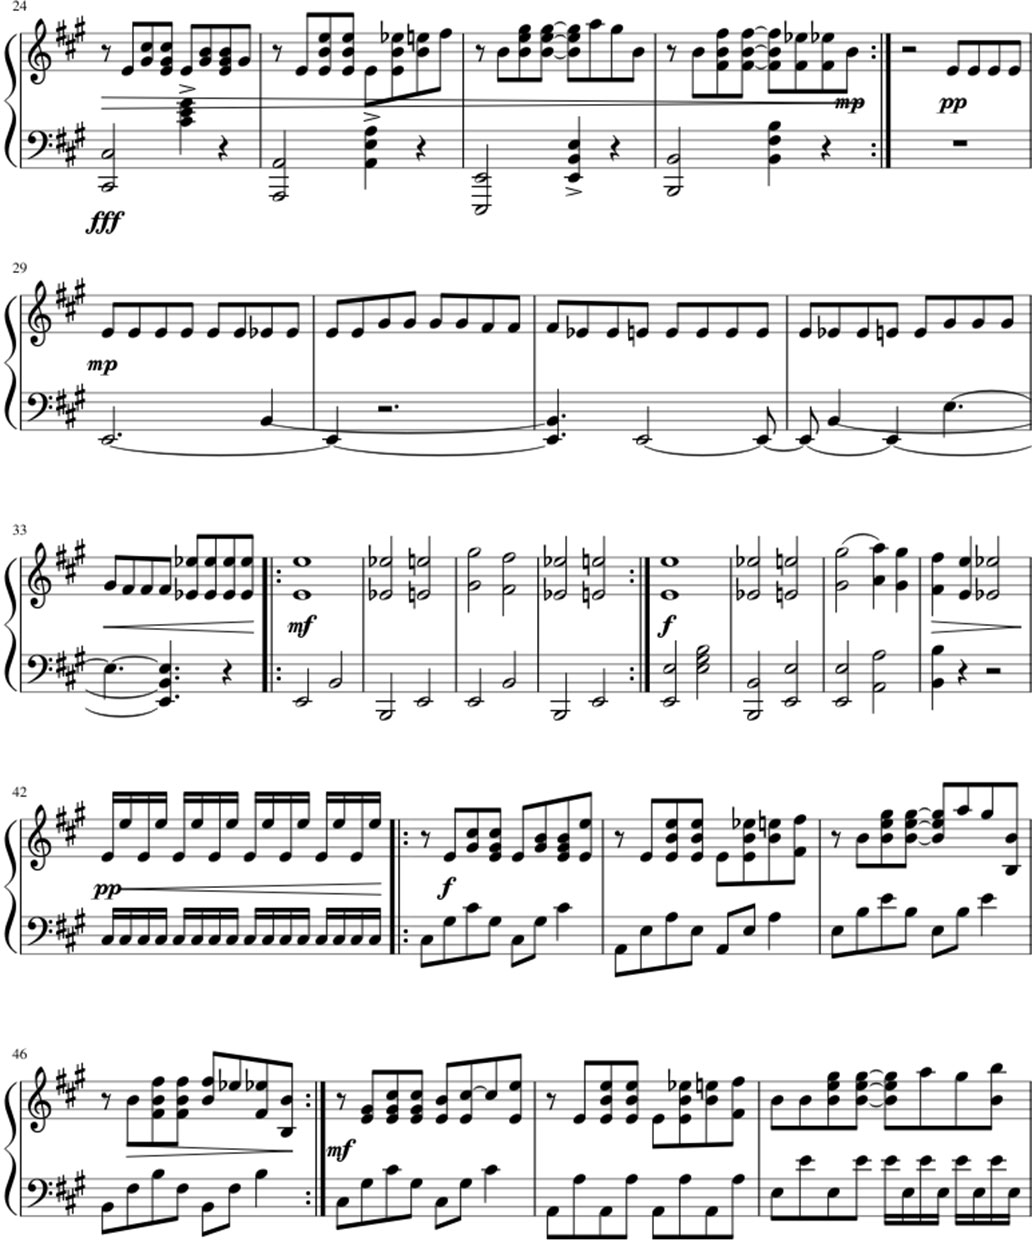 Force sheet music notes 2